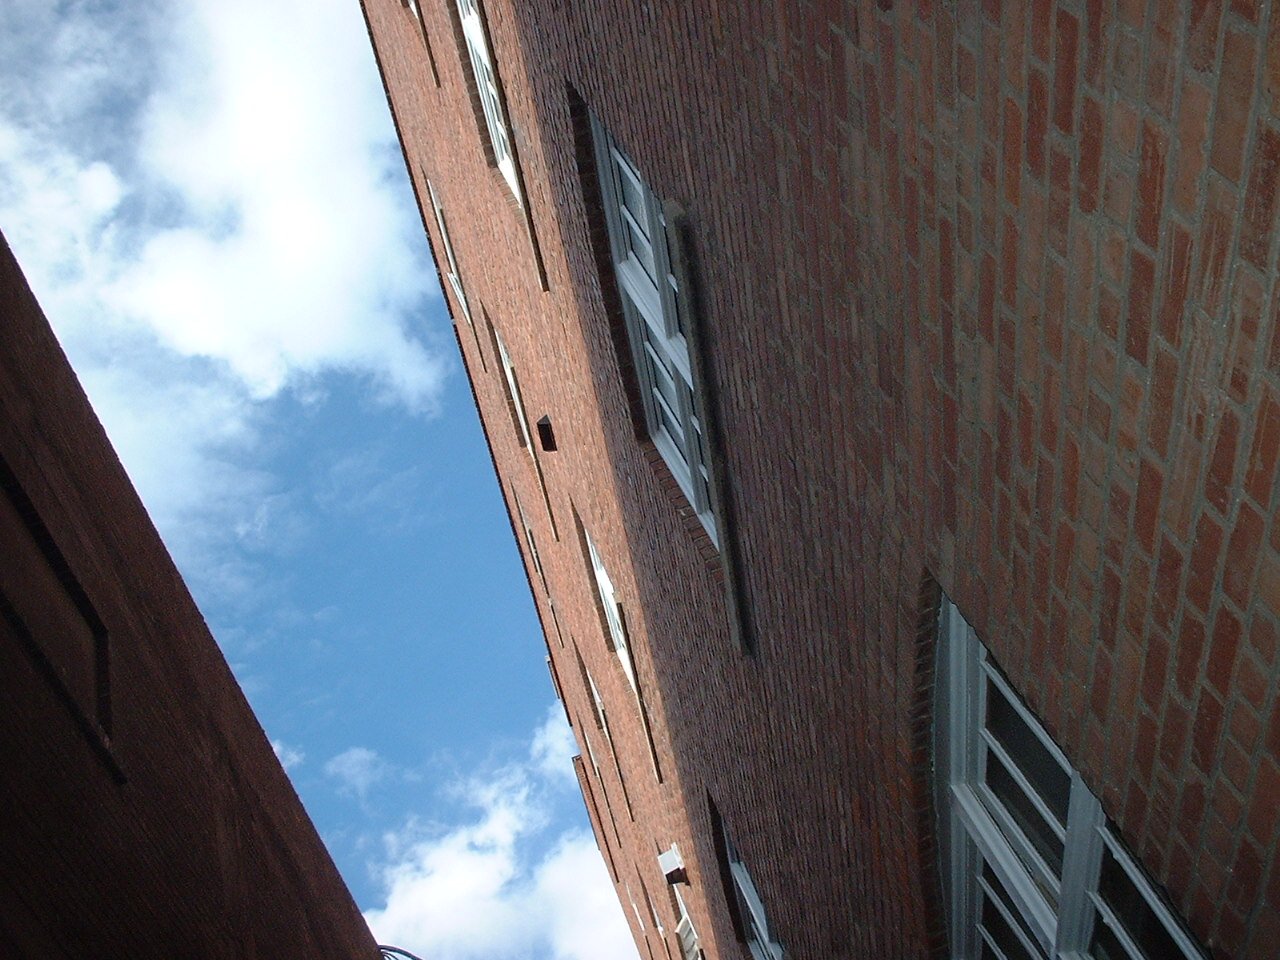 an upward view of a tall brick building with windows